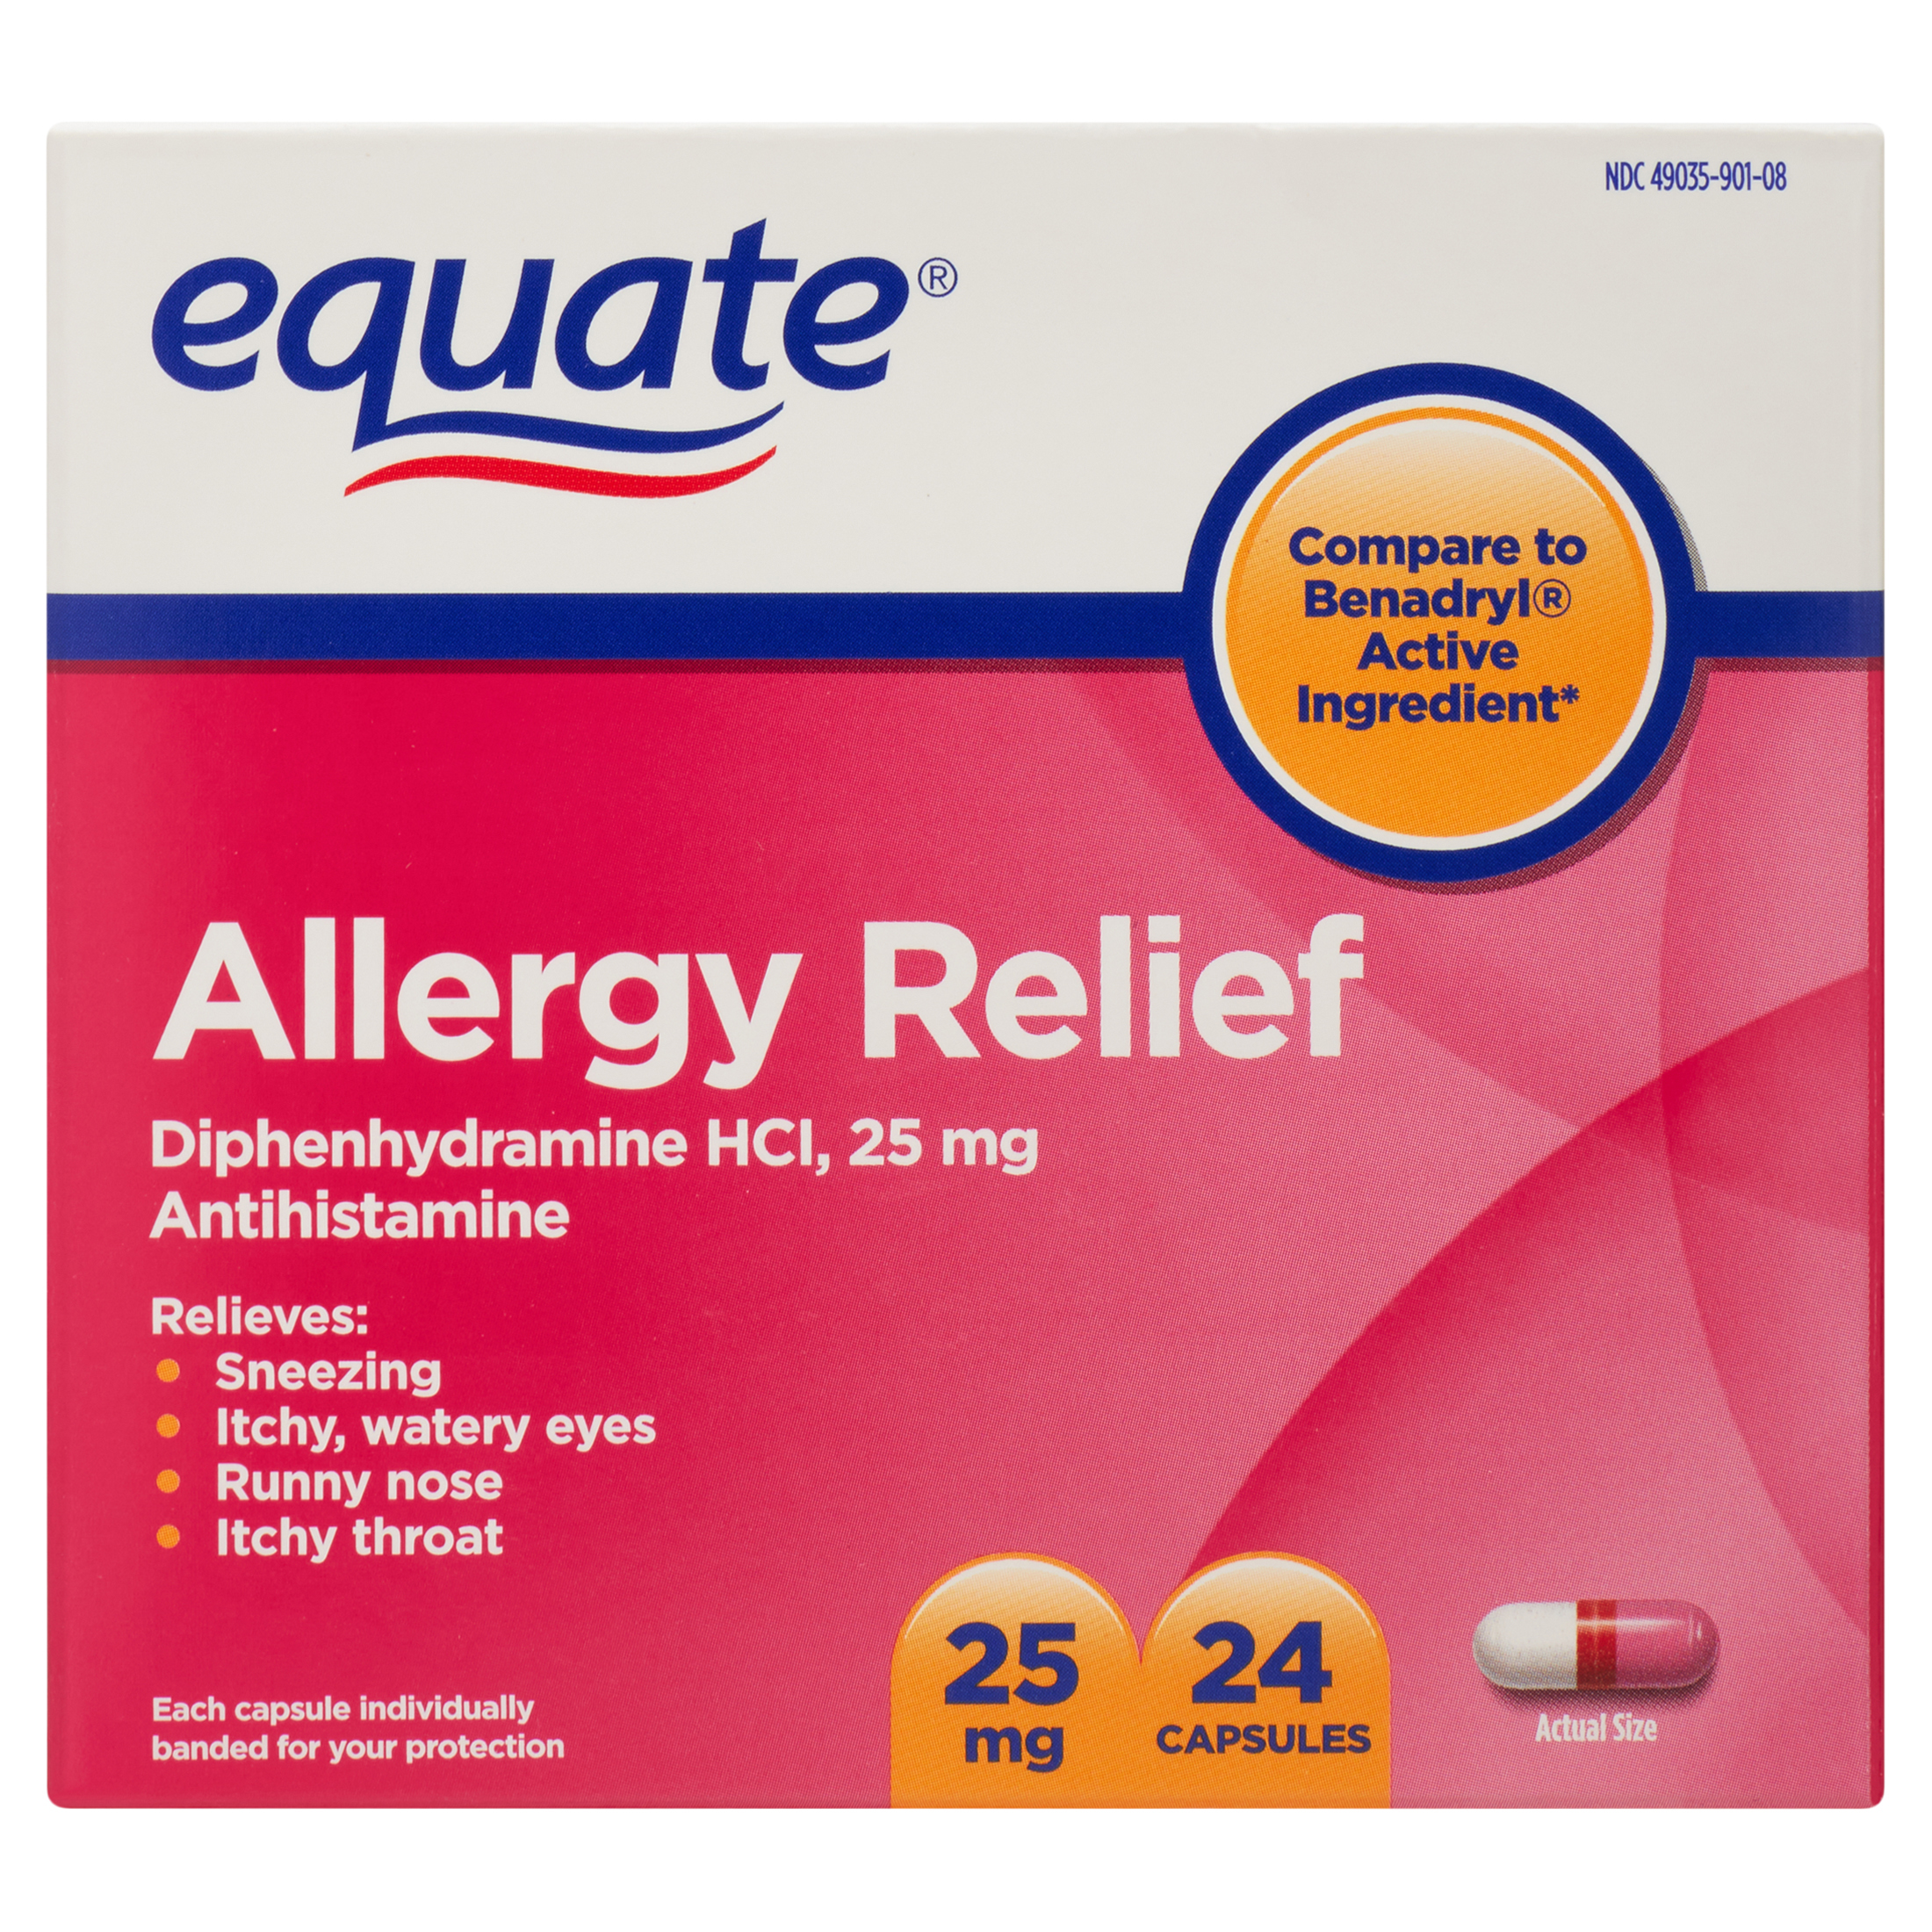 Equate Diphenhydramine Allergy Relief Capsules, 25 mg, 24 Count - image 1 of 7